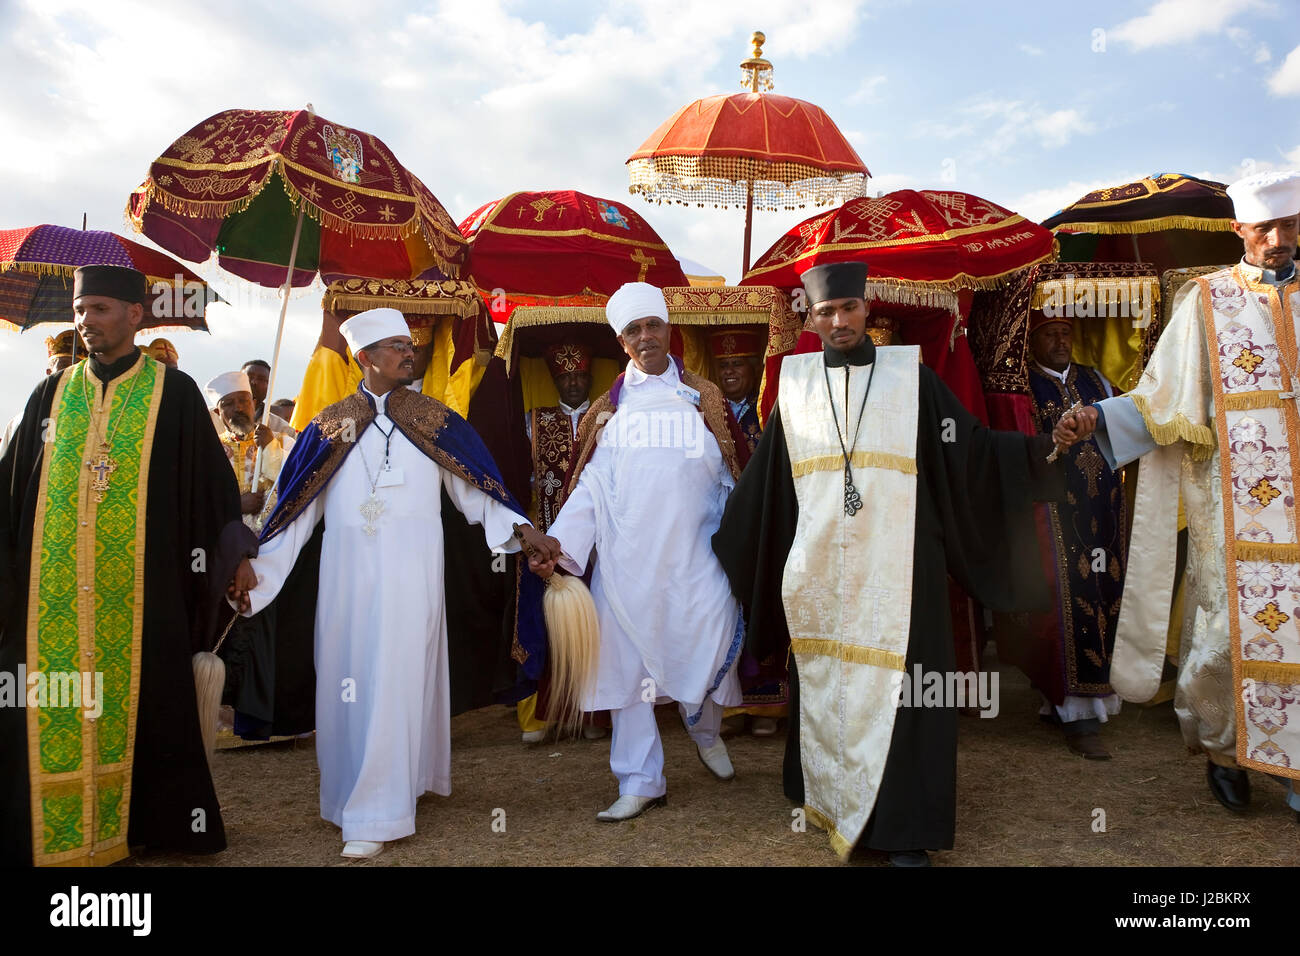 Priests carrying Ark of the Covenant replica's, procession of Timket (celebration of Epiphany, Christian Orthodox Church) Addis Ababa, Ethiopia Stock Photo